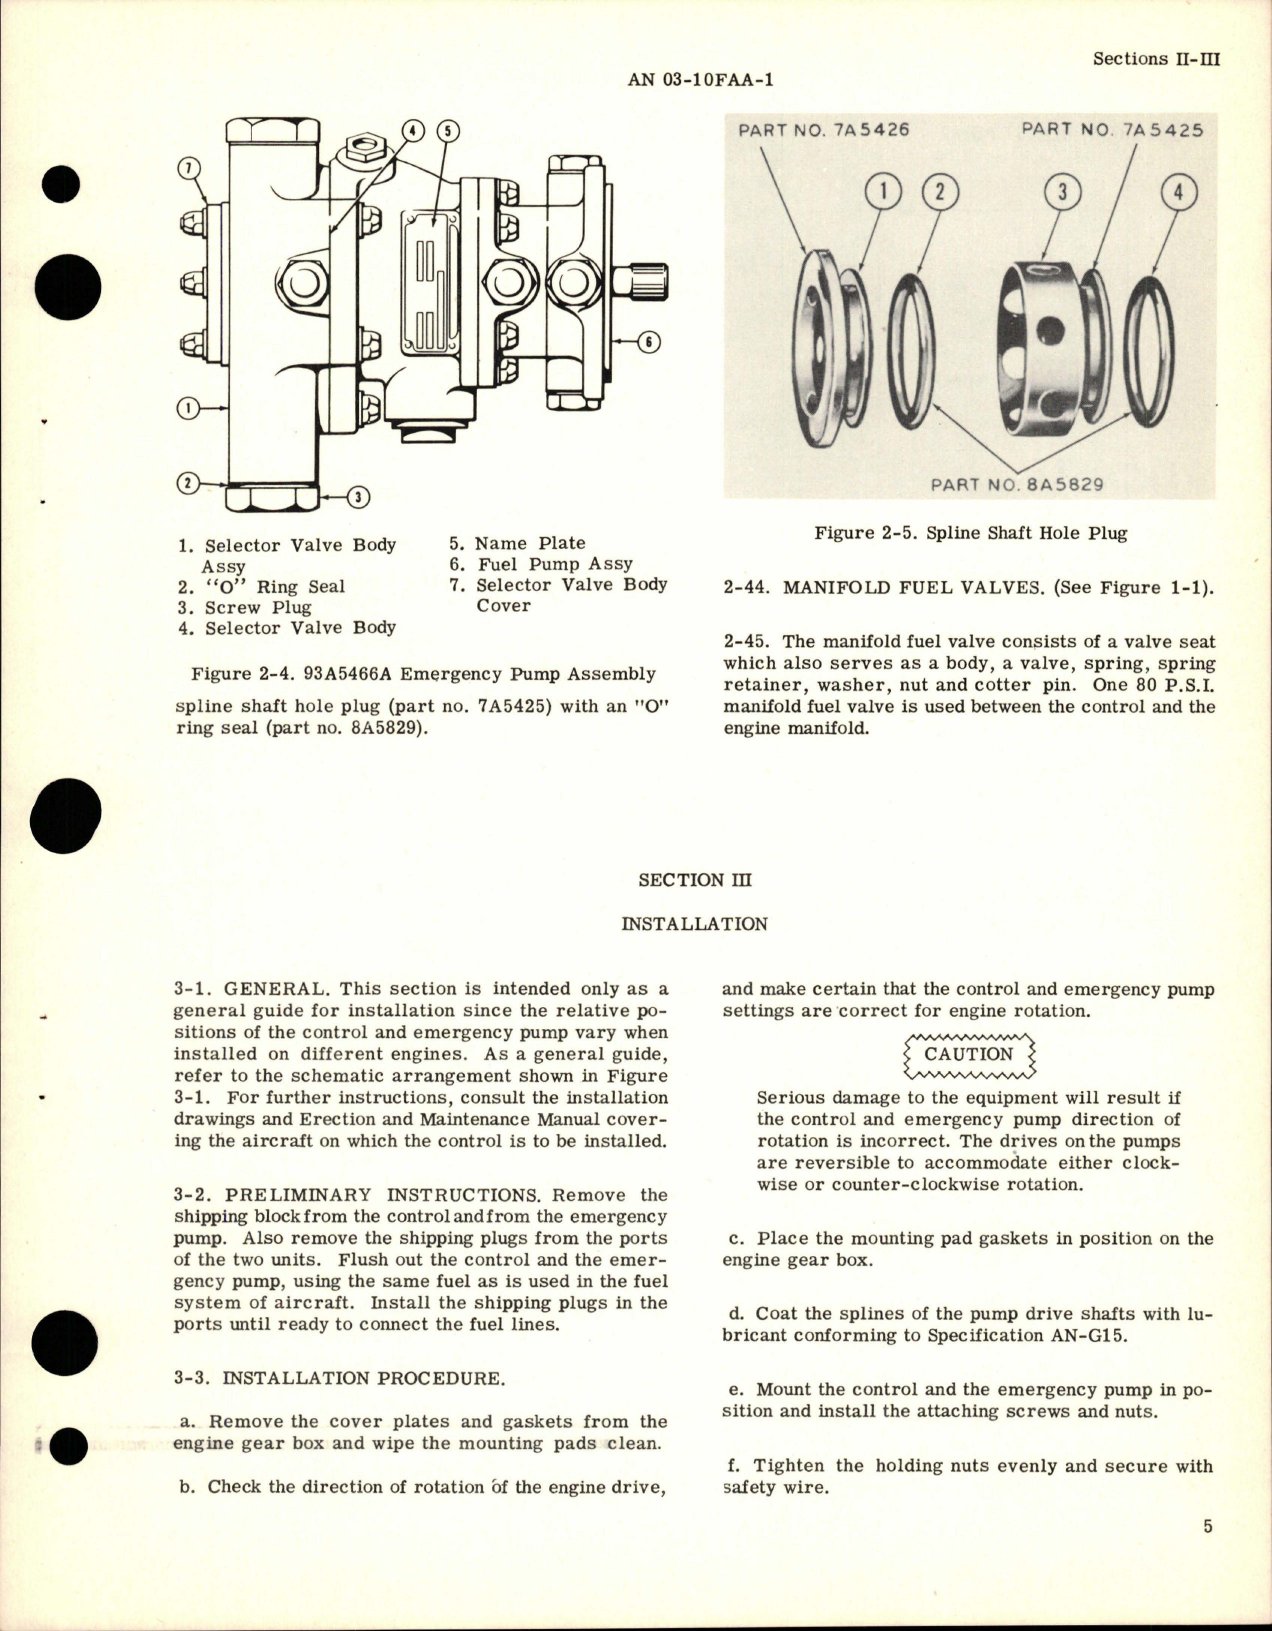 Sample page 9 from AirCorps Library document: Overhaul Instructions for Fuel Control - Model A5462, and Emergency Fuel Pump